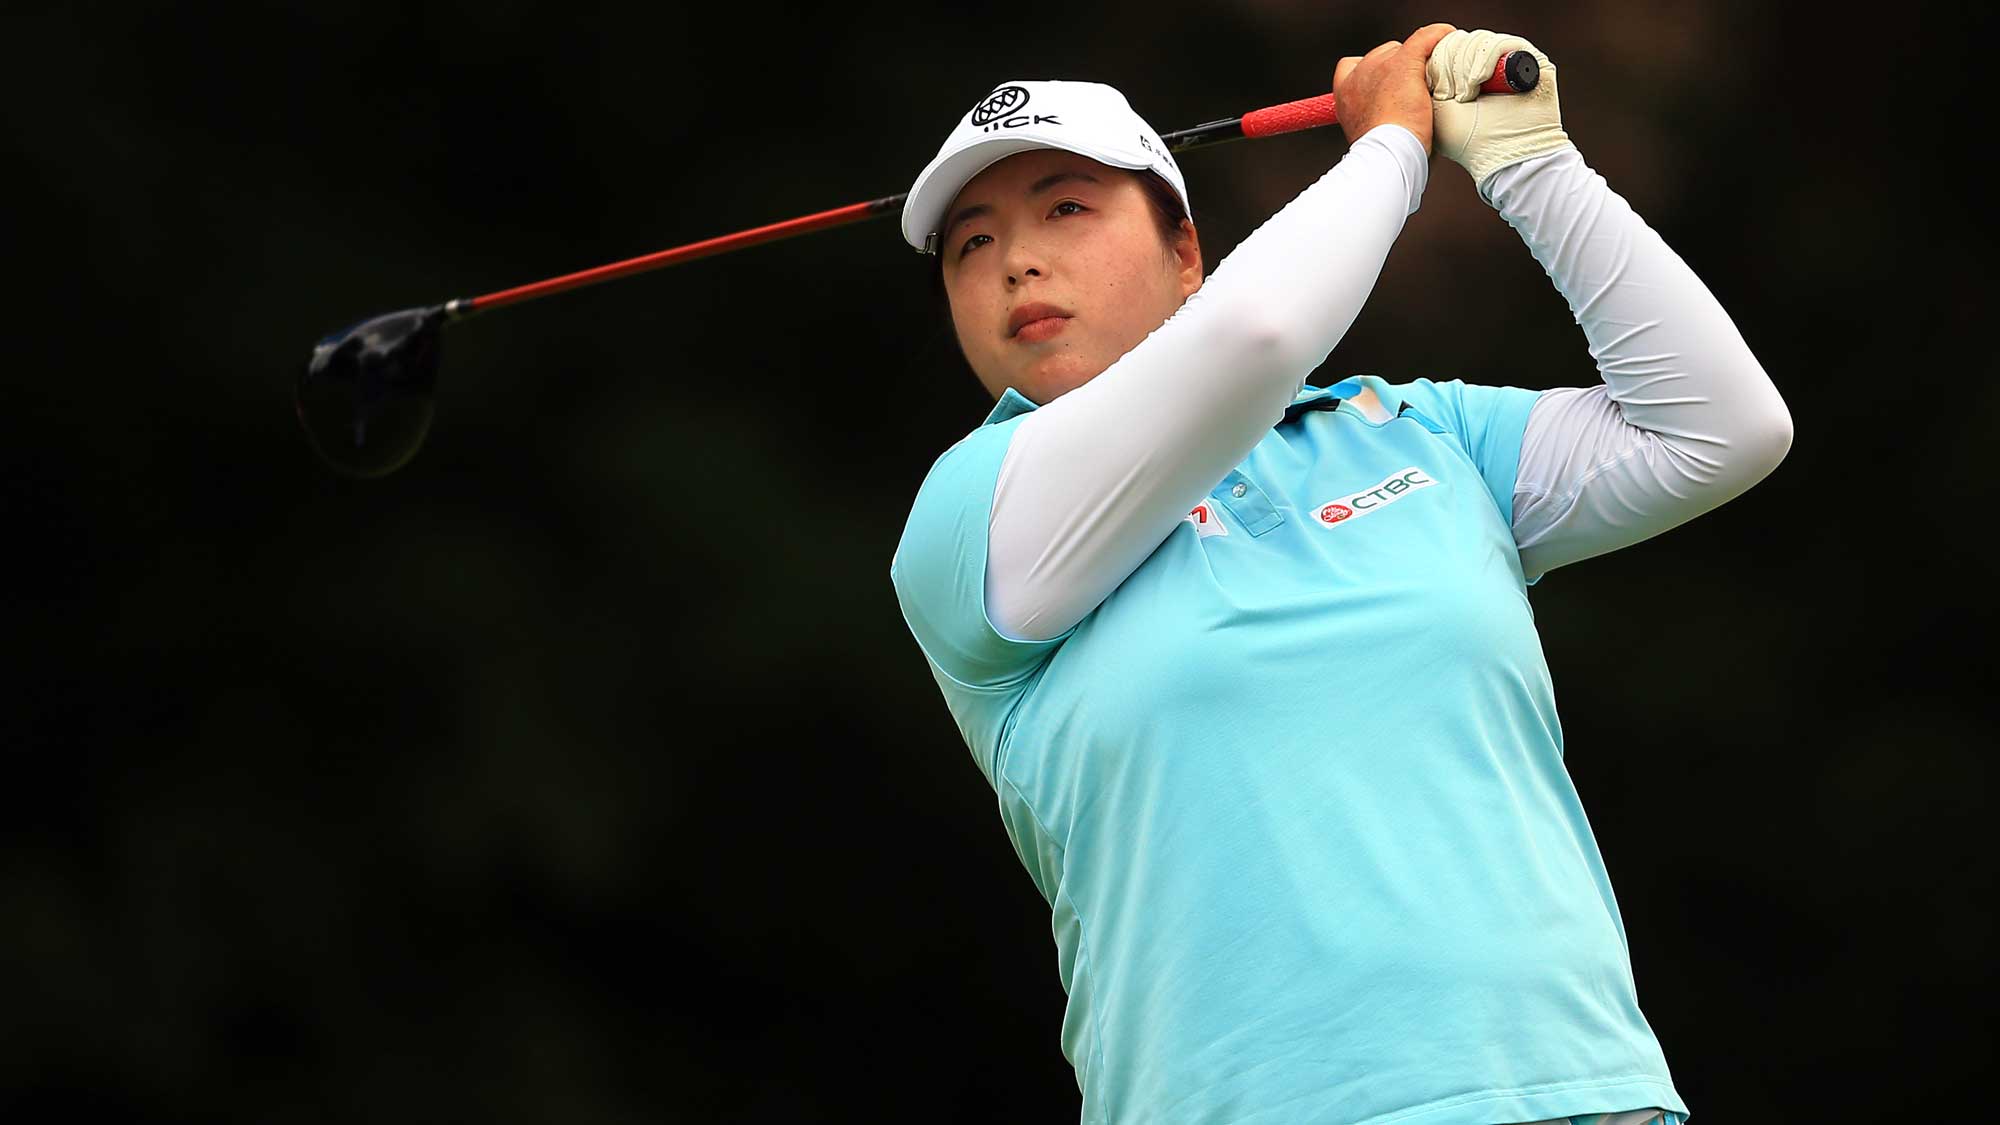 Shanshan Feng of China hits her tee shot on the 4th hole during the final round of the Canadian Pacific Women's Open